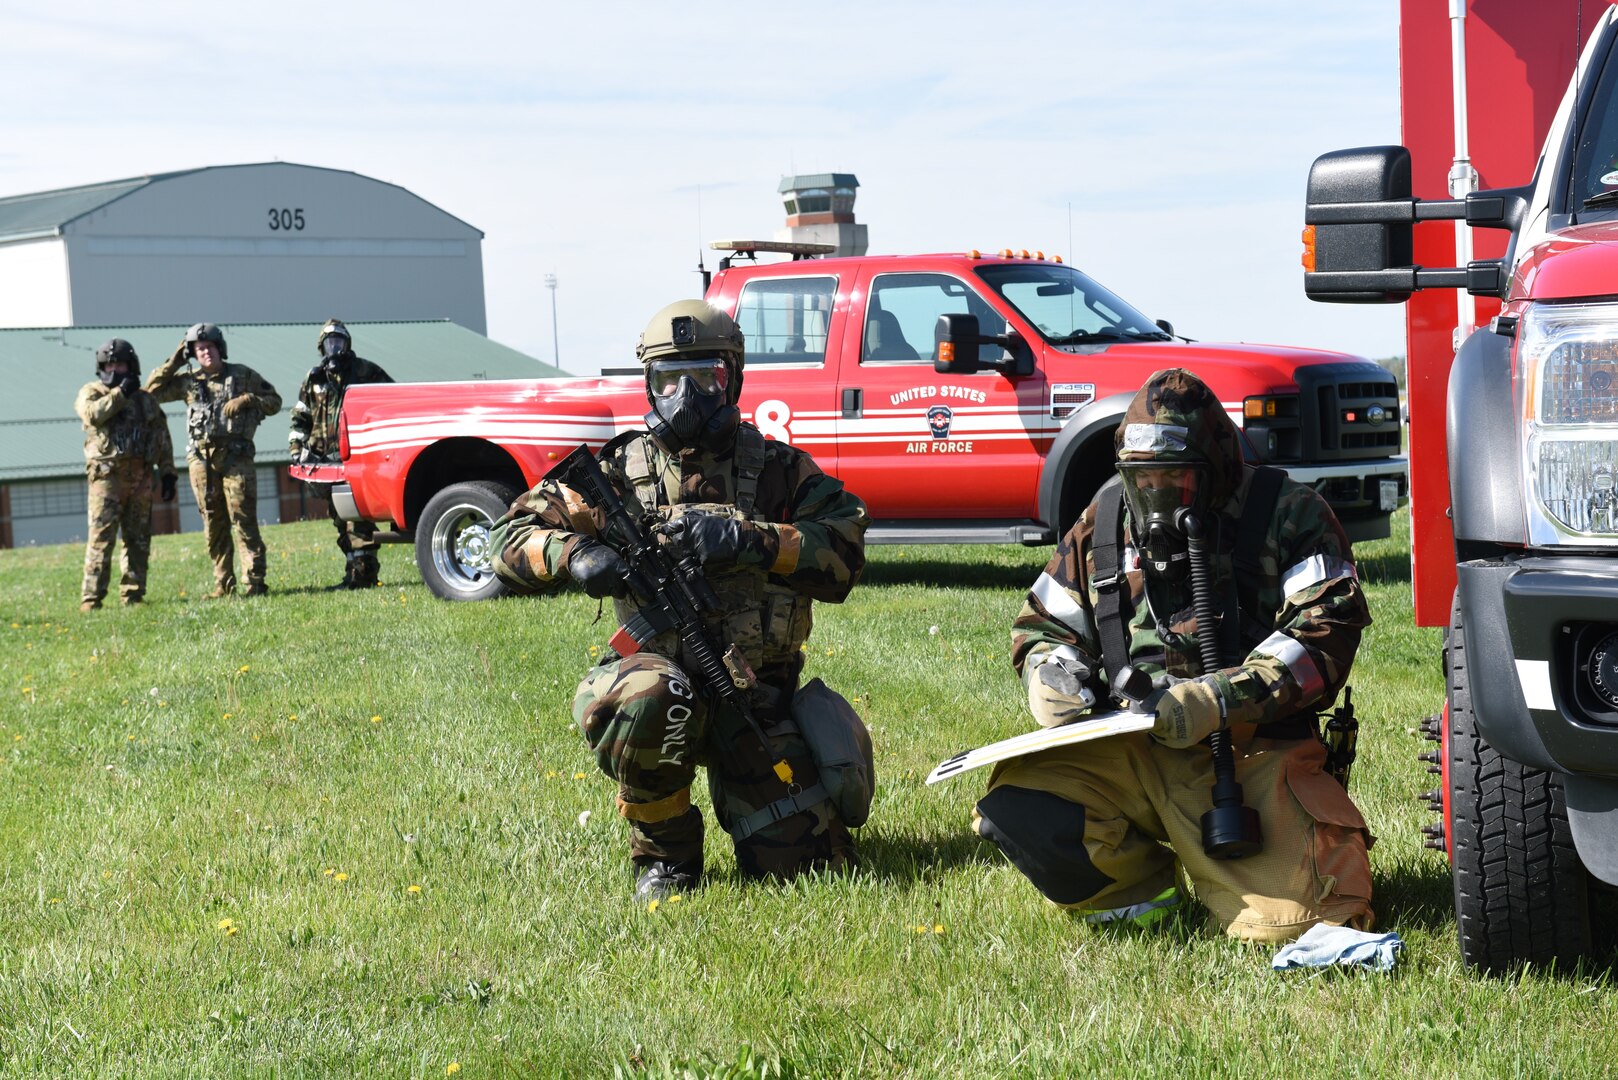 two people in chemical gear and masks kneel in the grass